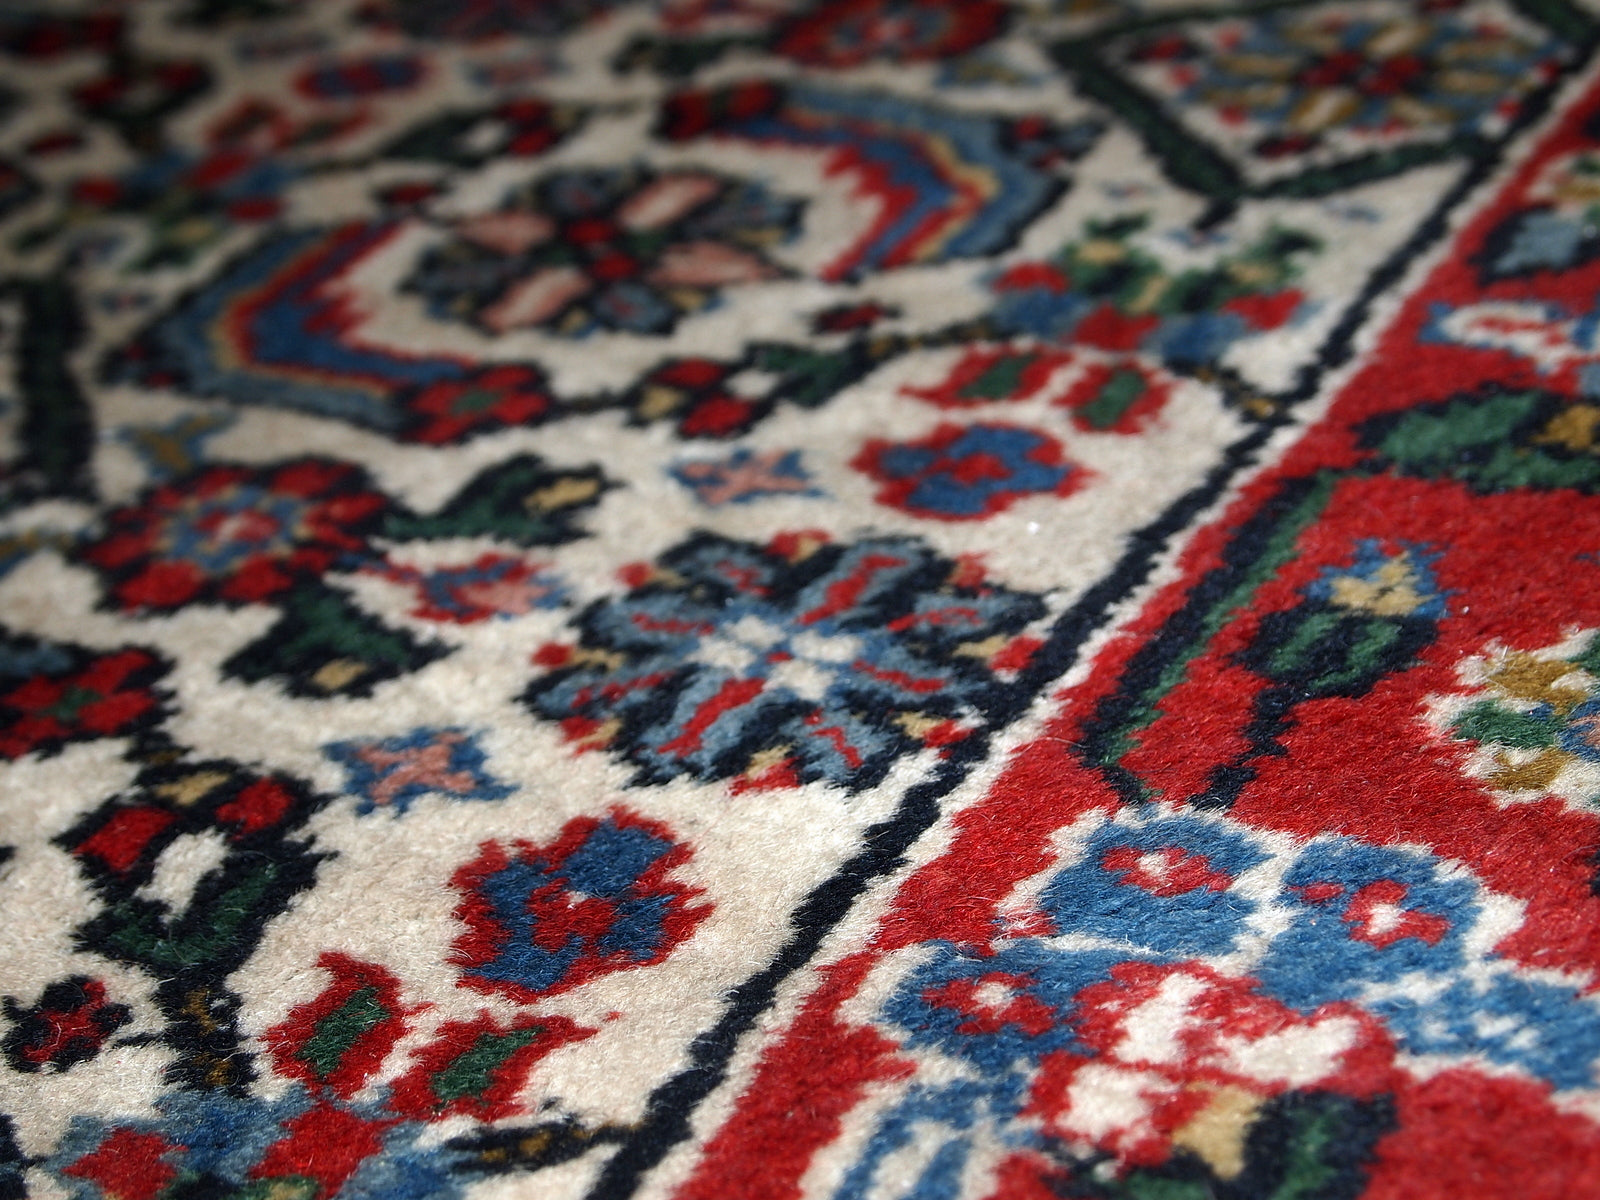 Vintage Indian Agra rug in original good condition. The rug made in white, blue and red shades.